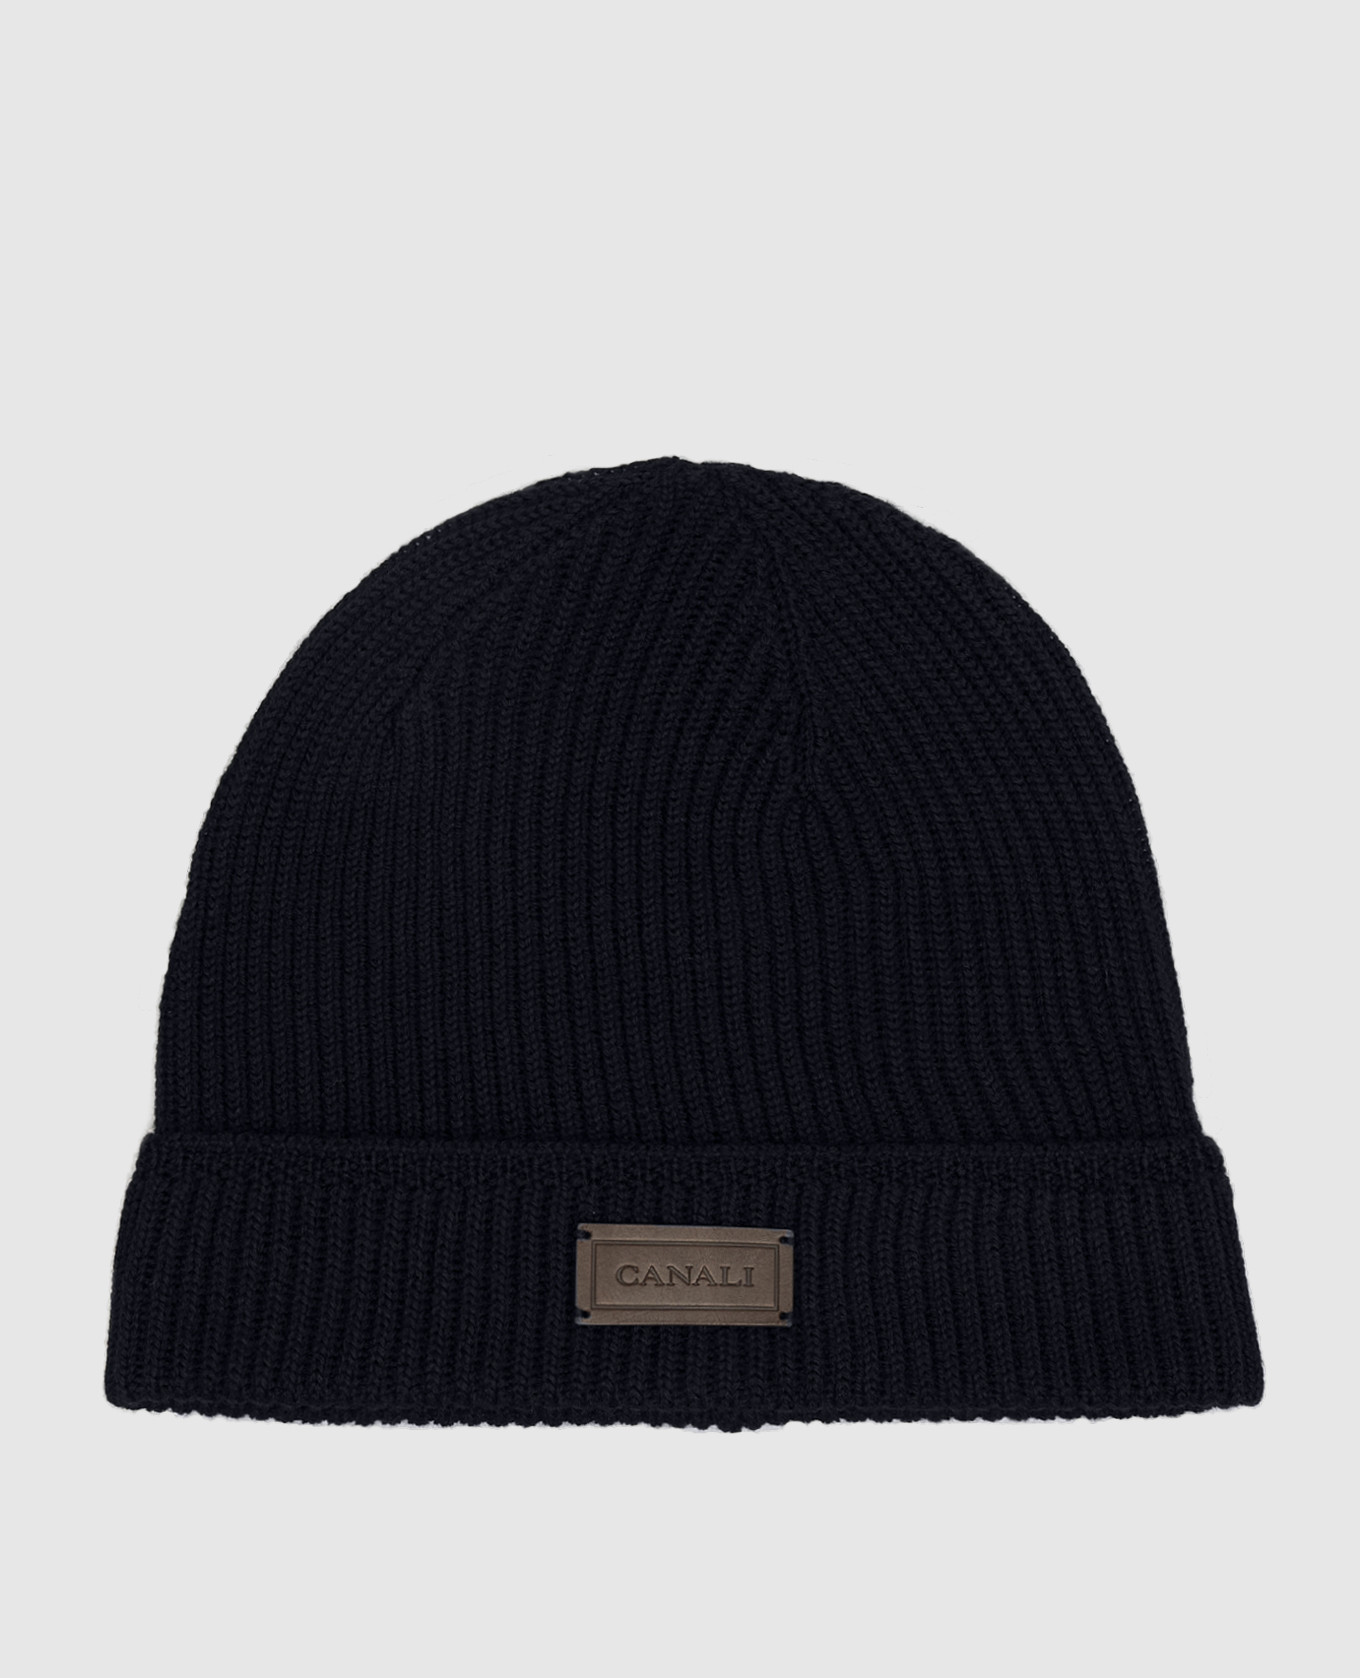 Blue wool cap with logo